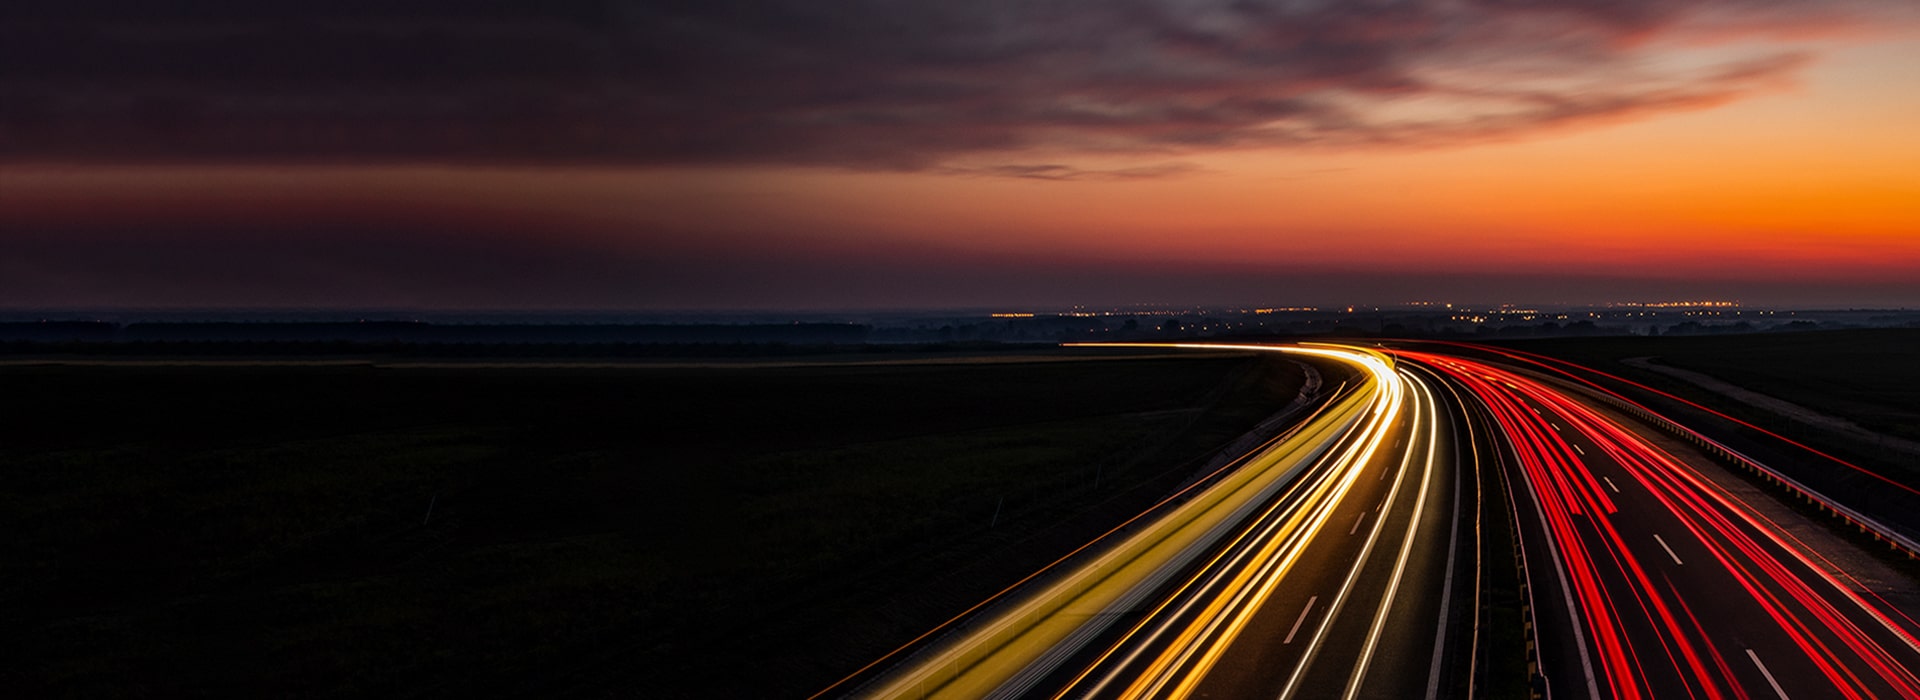 The Road Ahead: Digital Infrastructure for the Data-Driven